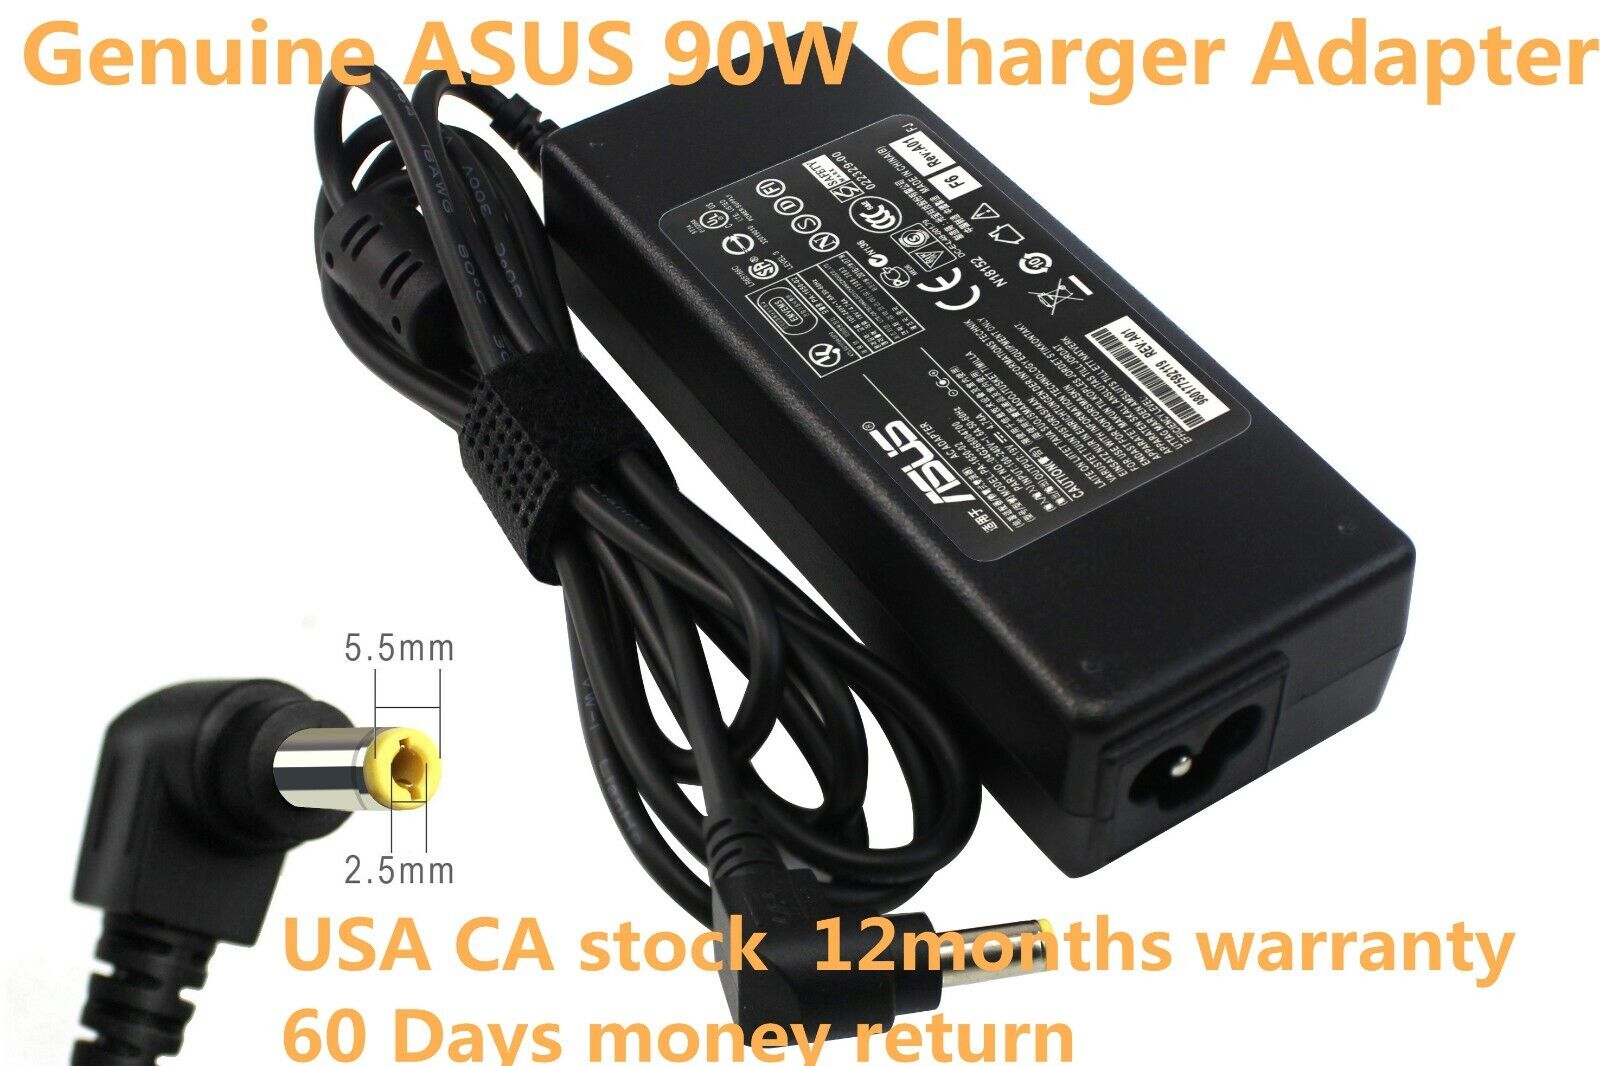 NEW Genuine ASUS A53 A53Z A53S A53T A55A U47A U57A A53SD 90W Charger Adapter OEM